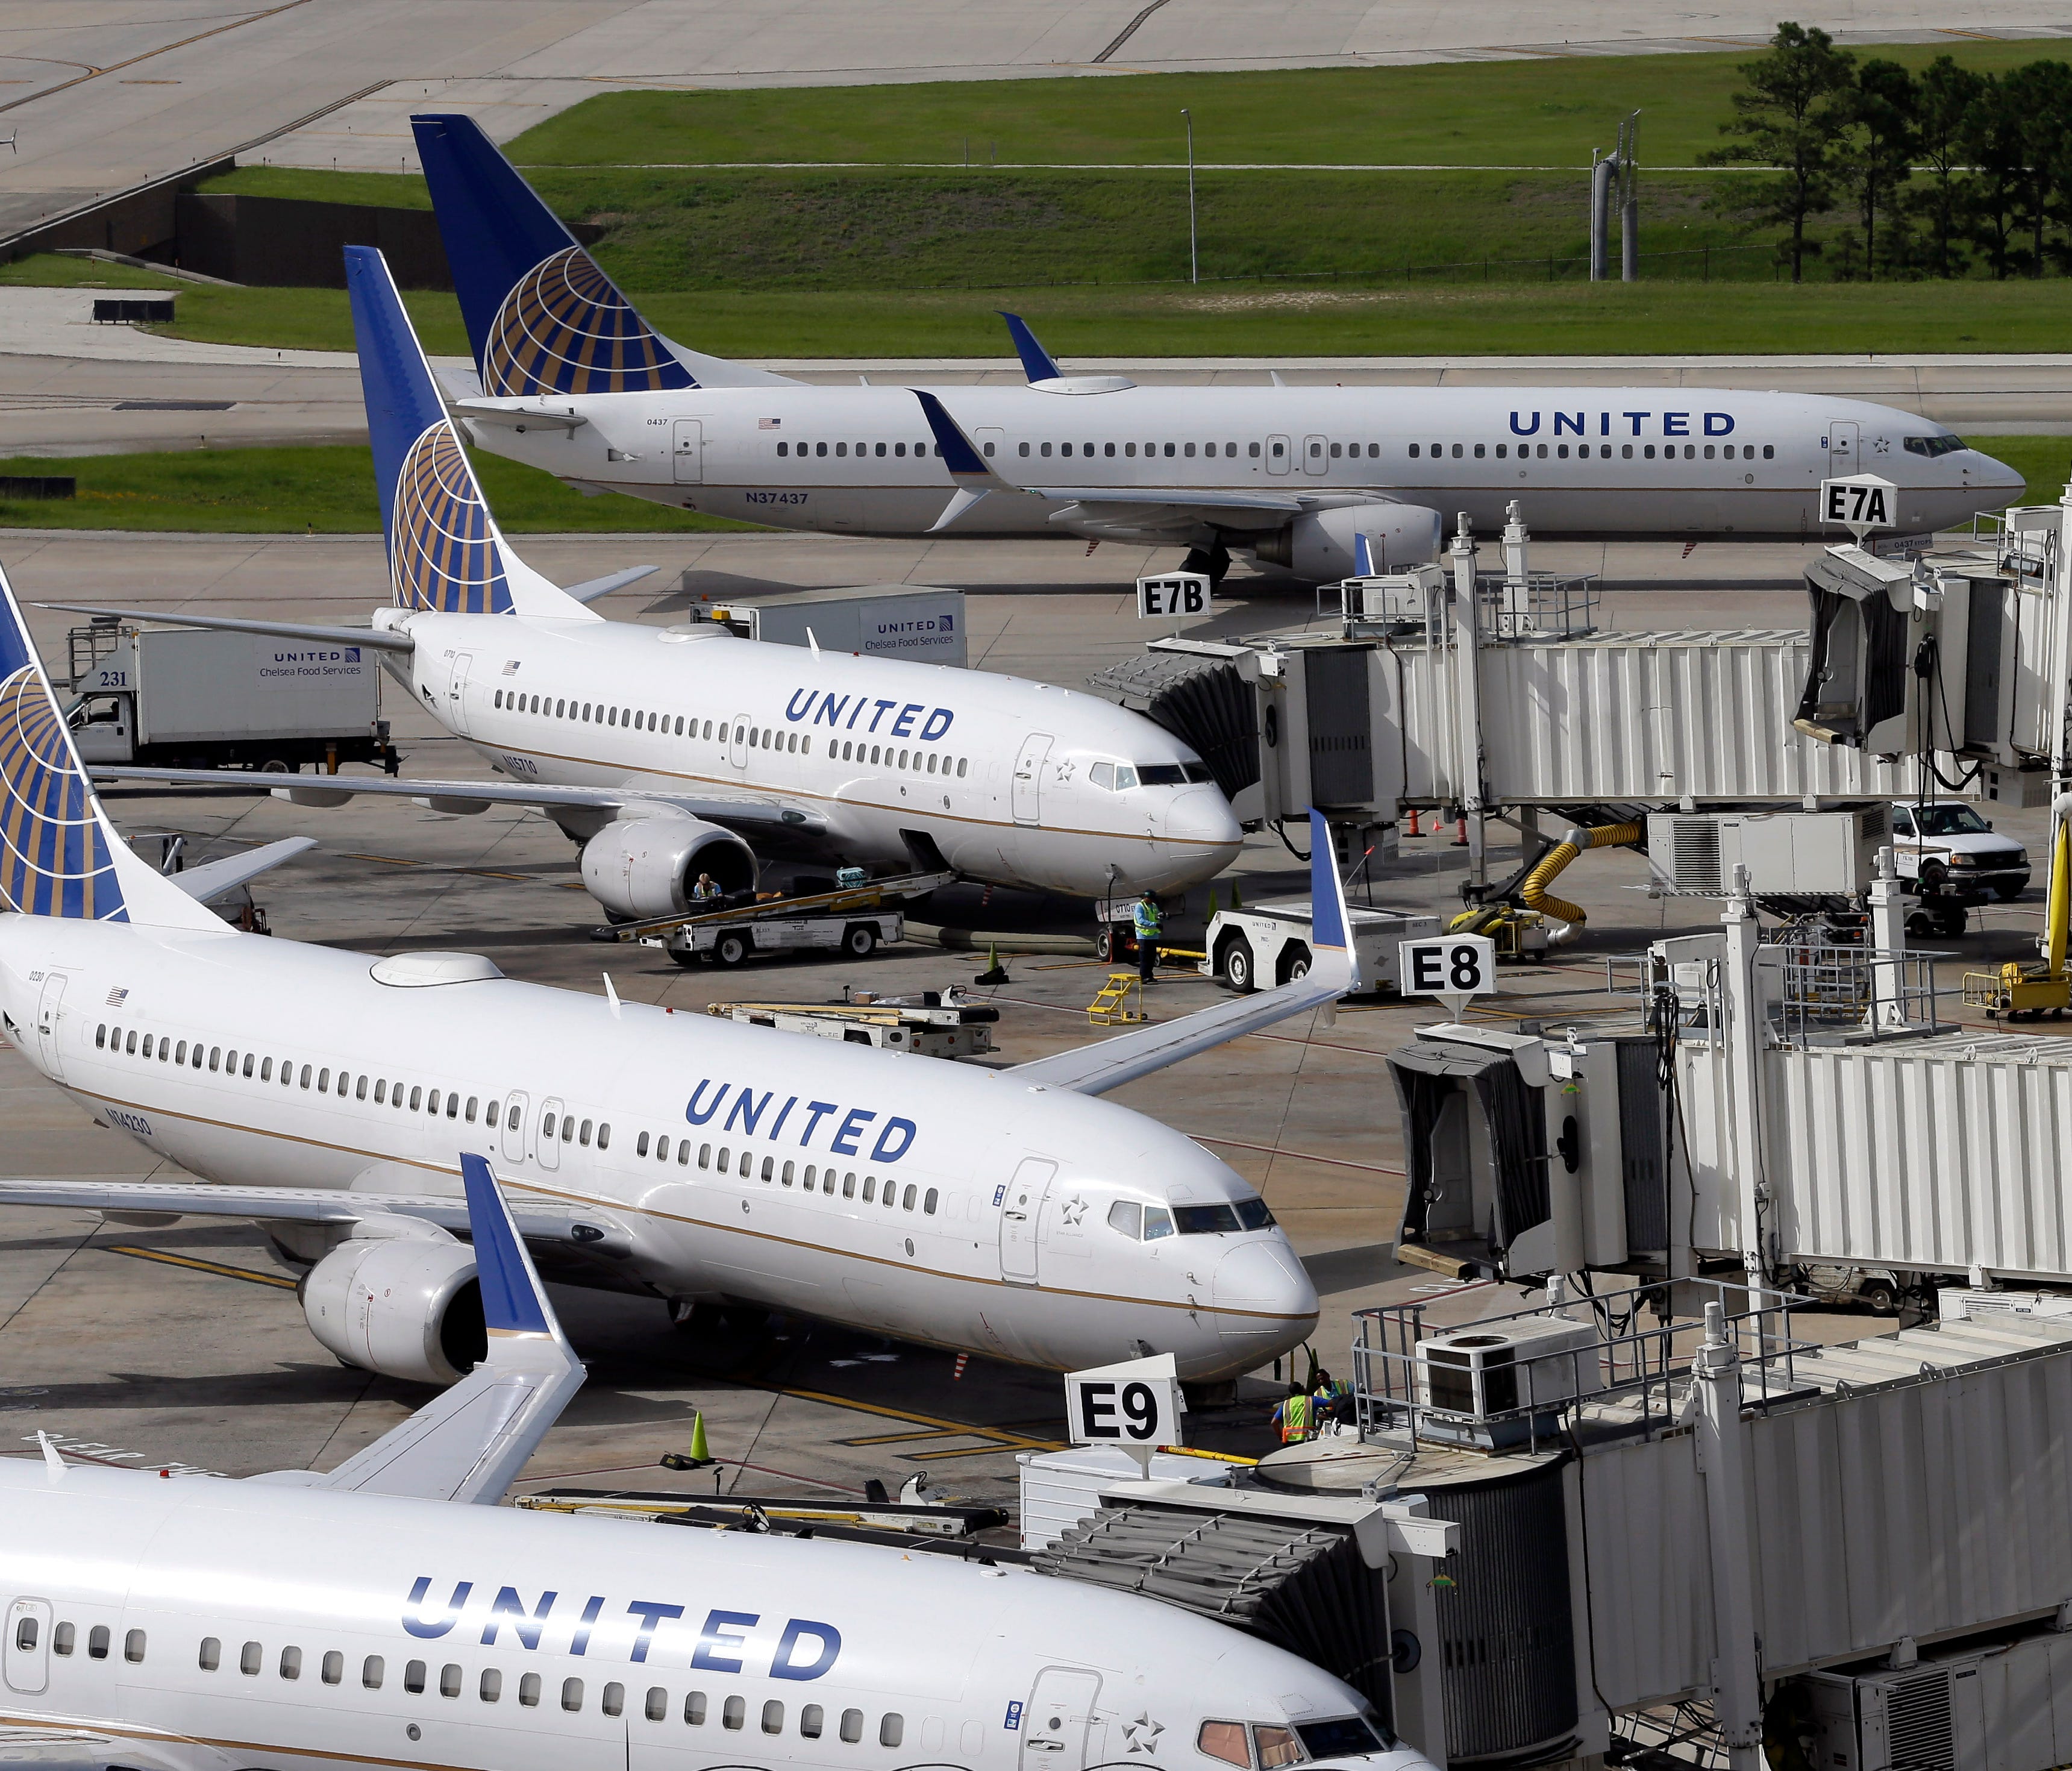 Twitter exploded over the weekend with negative comments directed at United Airlines when a gate agent refused to board two young girls flying for free on a 